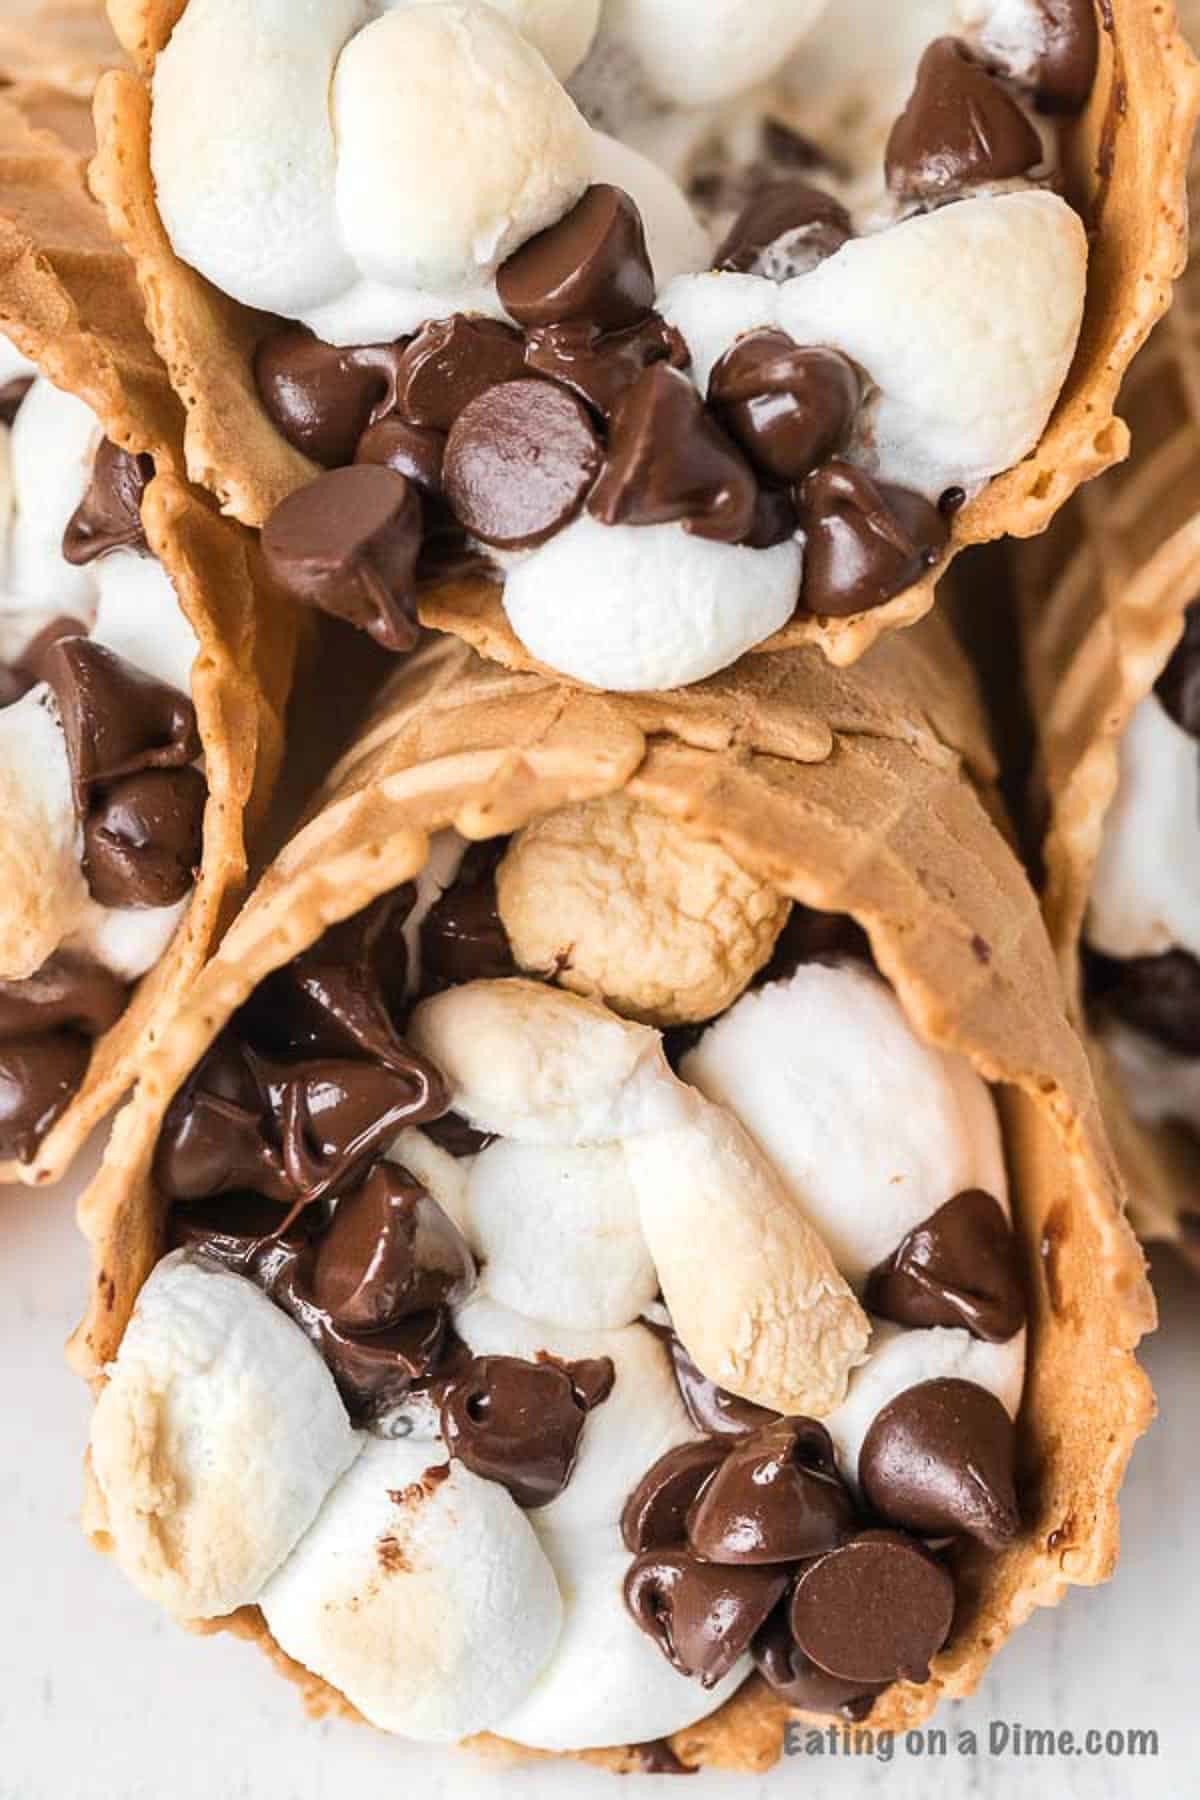 Check out how to make s’mores campfire cones that are fun and less messy than traditional s’mores. Camp fire cones are a blast and fun to make. Campfire sugar cone s’mores are a fun and easy dessert for any camping treat. Campfire s’mores cones will be your favorite summer treat! #eatingonadime #smoresrecipes #campfirecones #easydesserts 